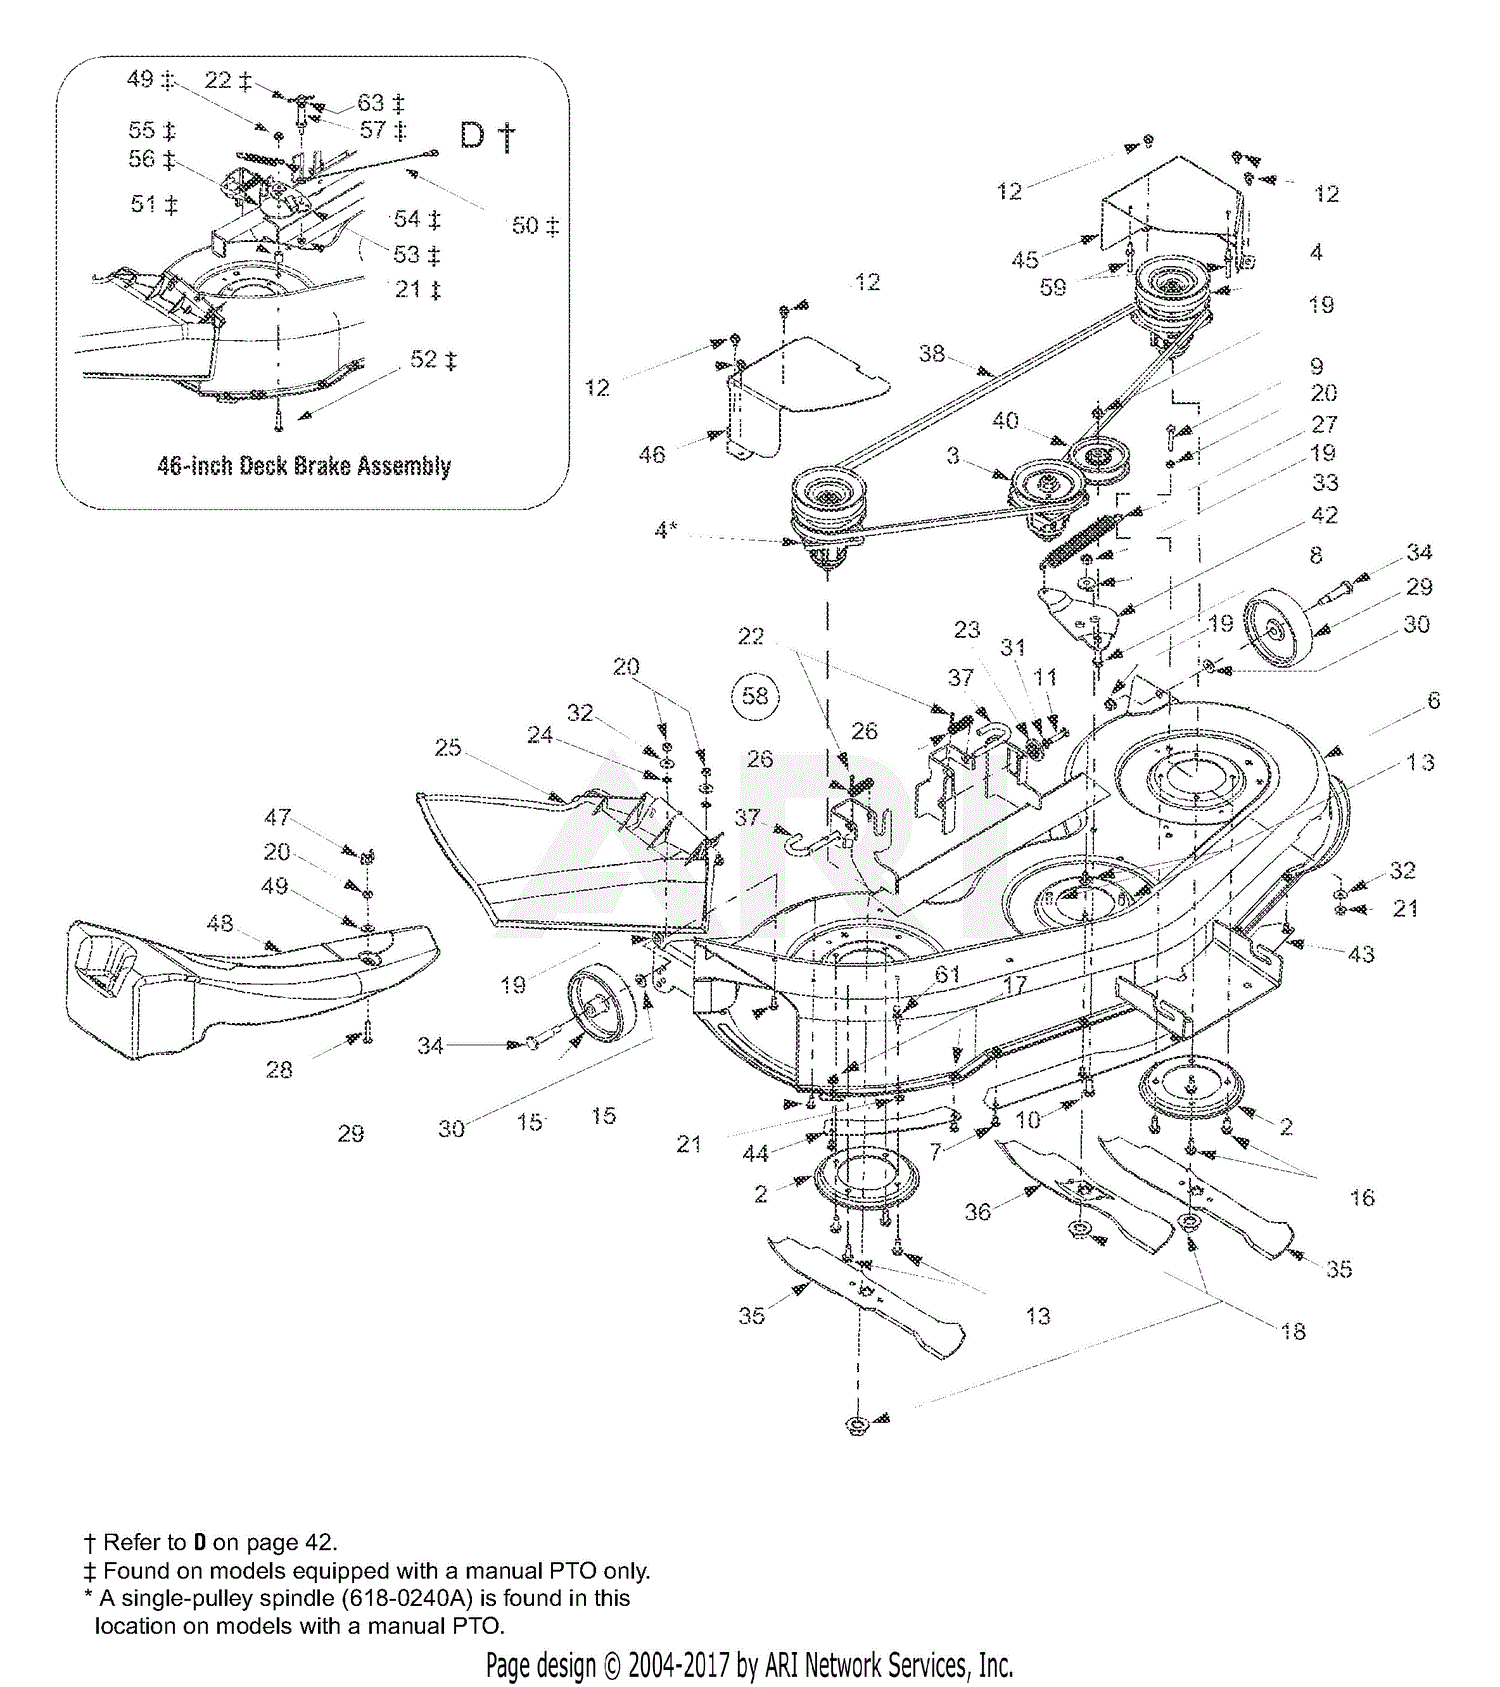 Huskee Riding Mower Drive Belt Diagram Belt Image and Picture